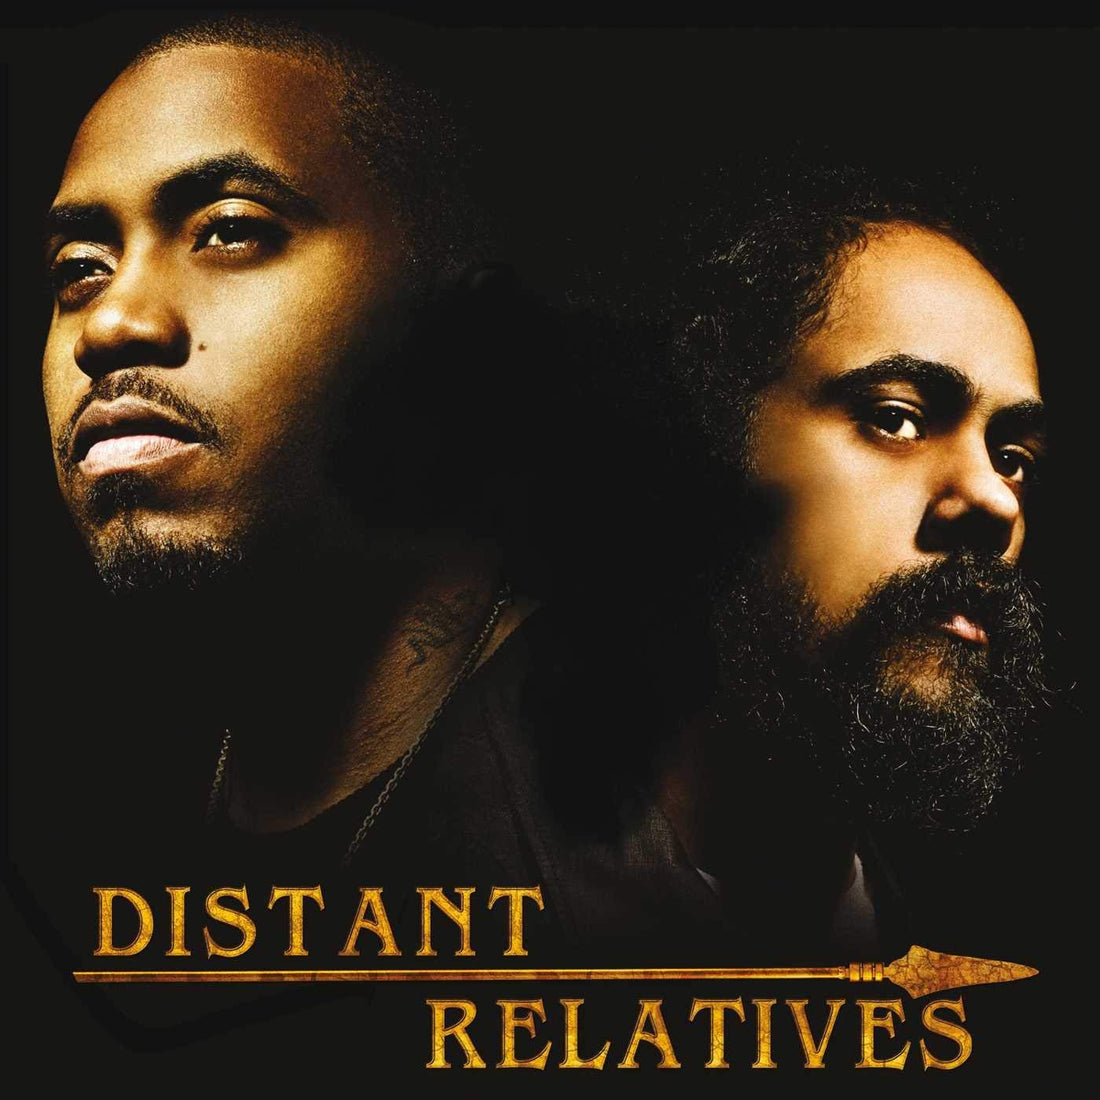 Nas & Damian Marley- Distant Relatives